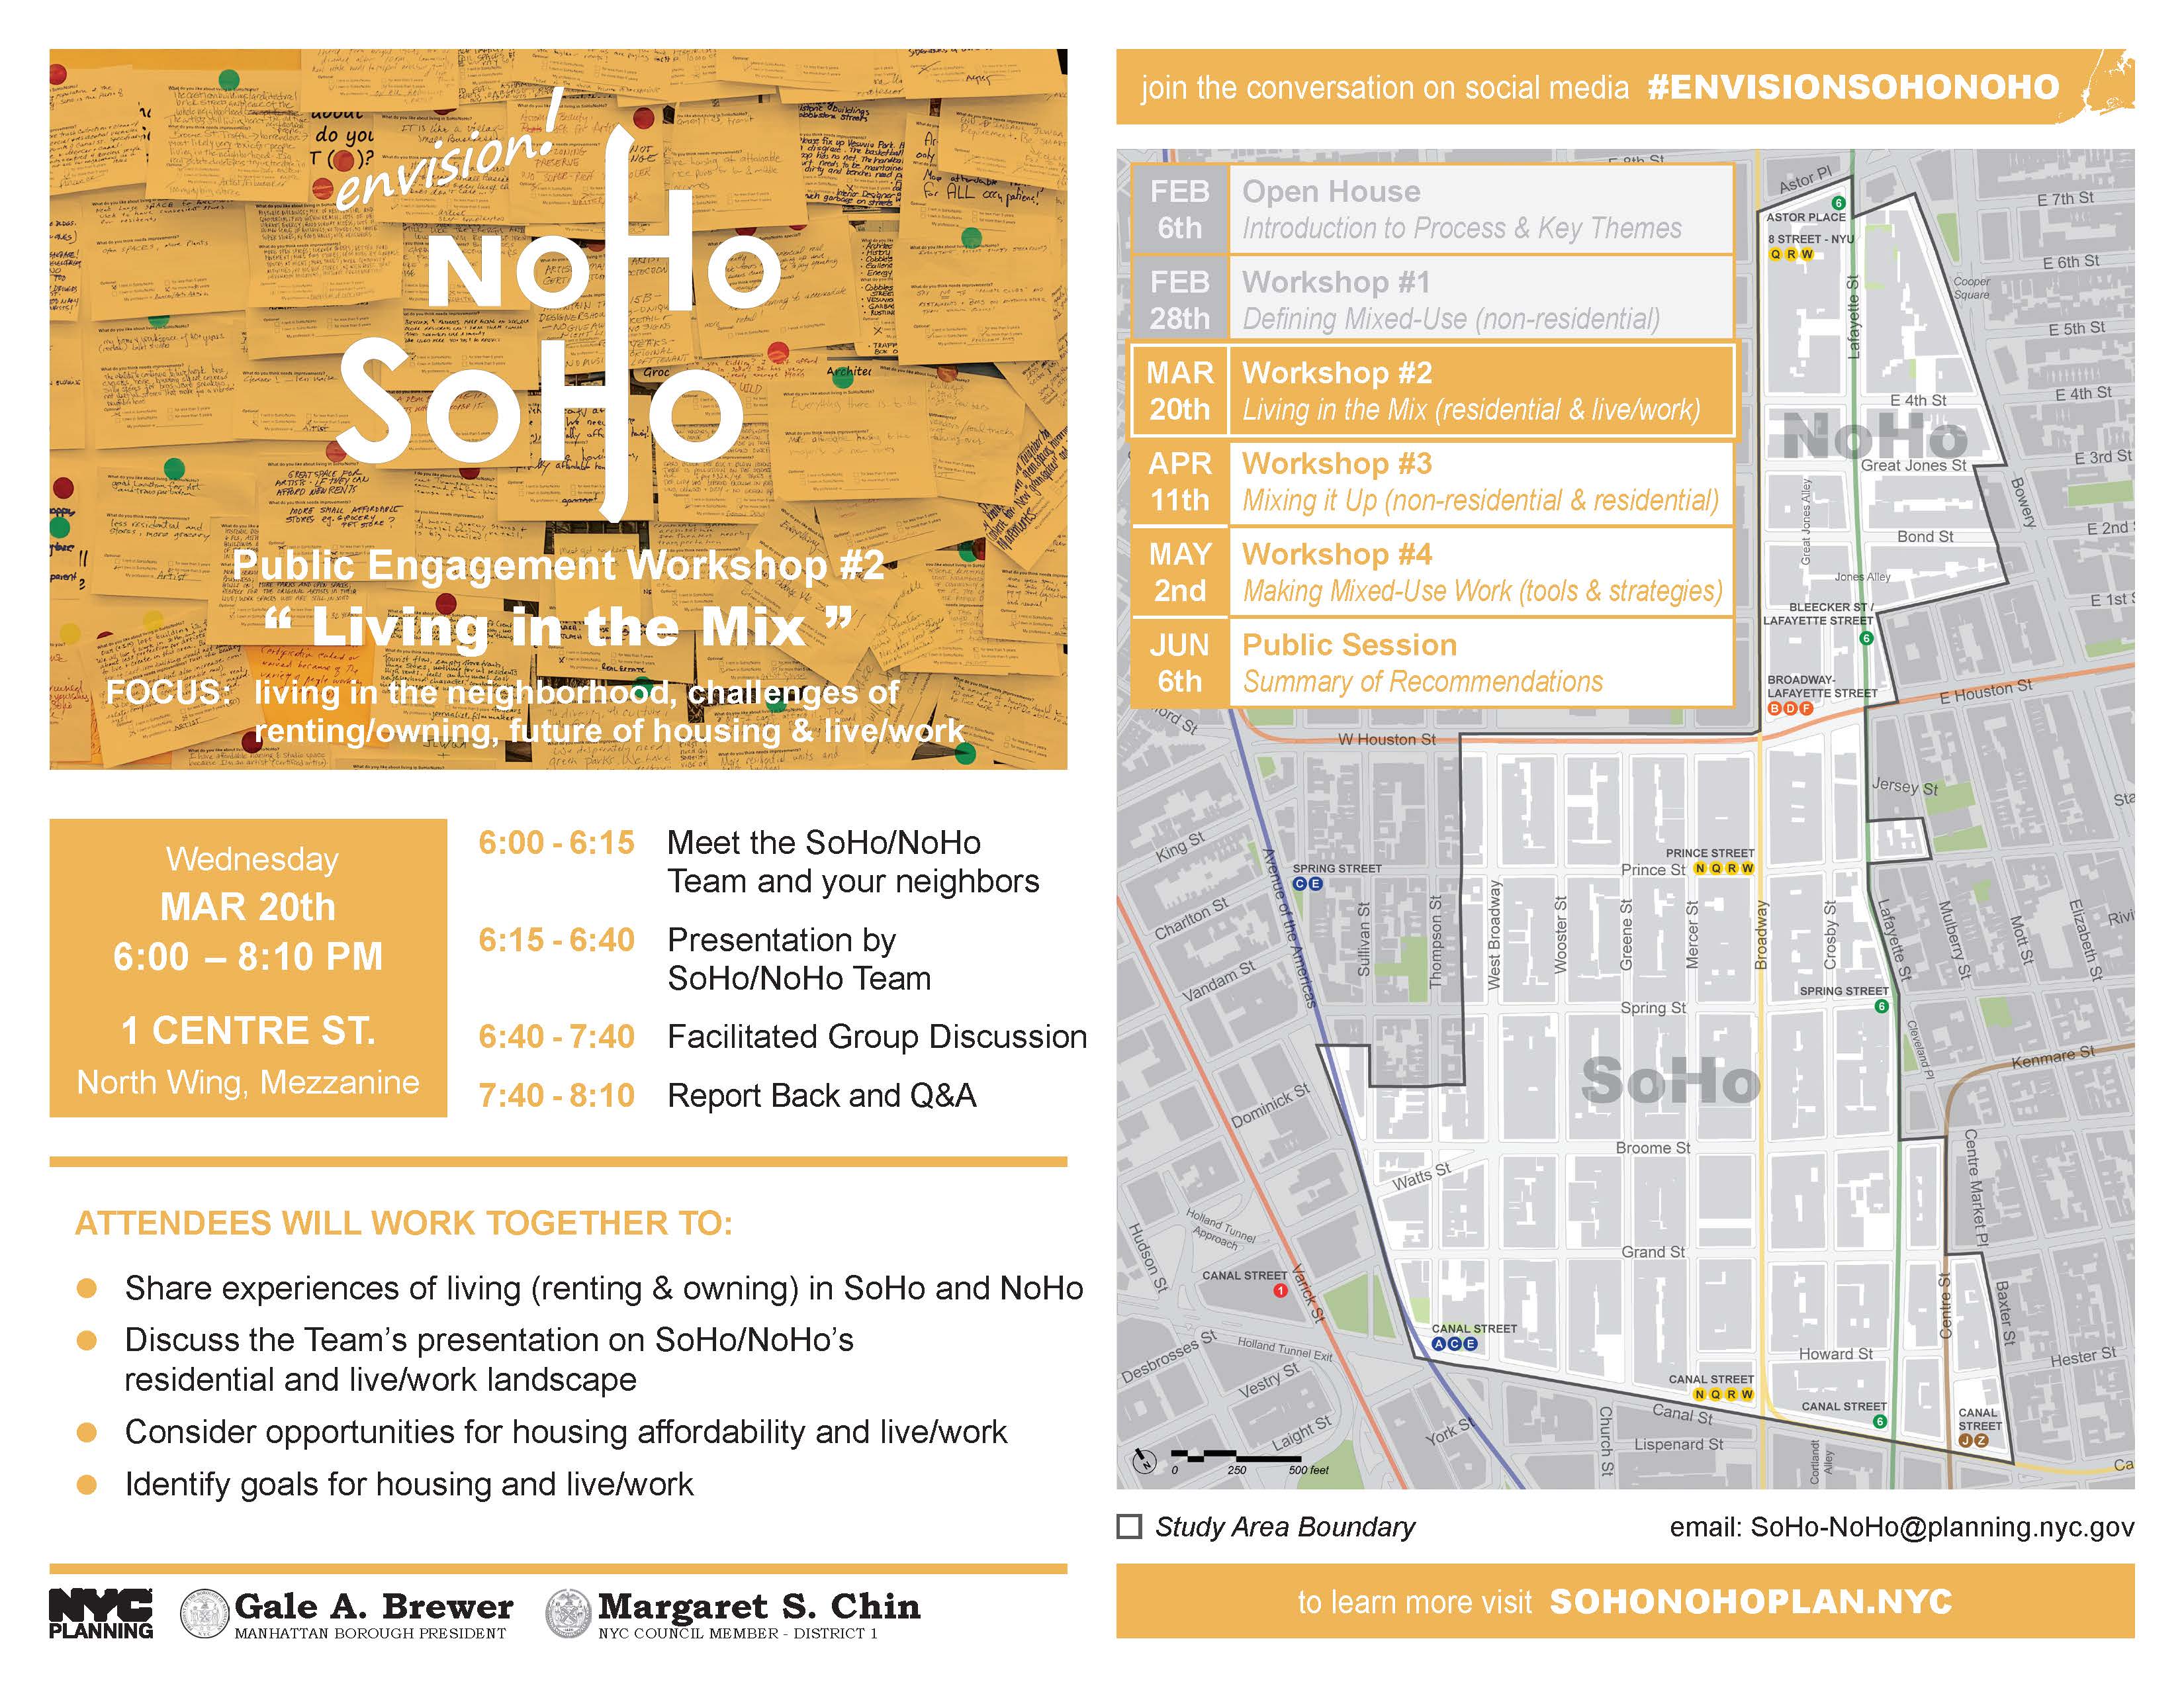 SoHo NoHo Workshop 2: Living in the Mix